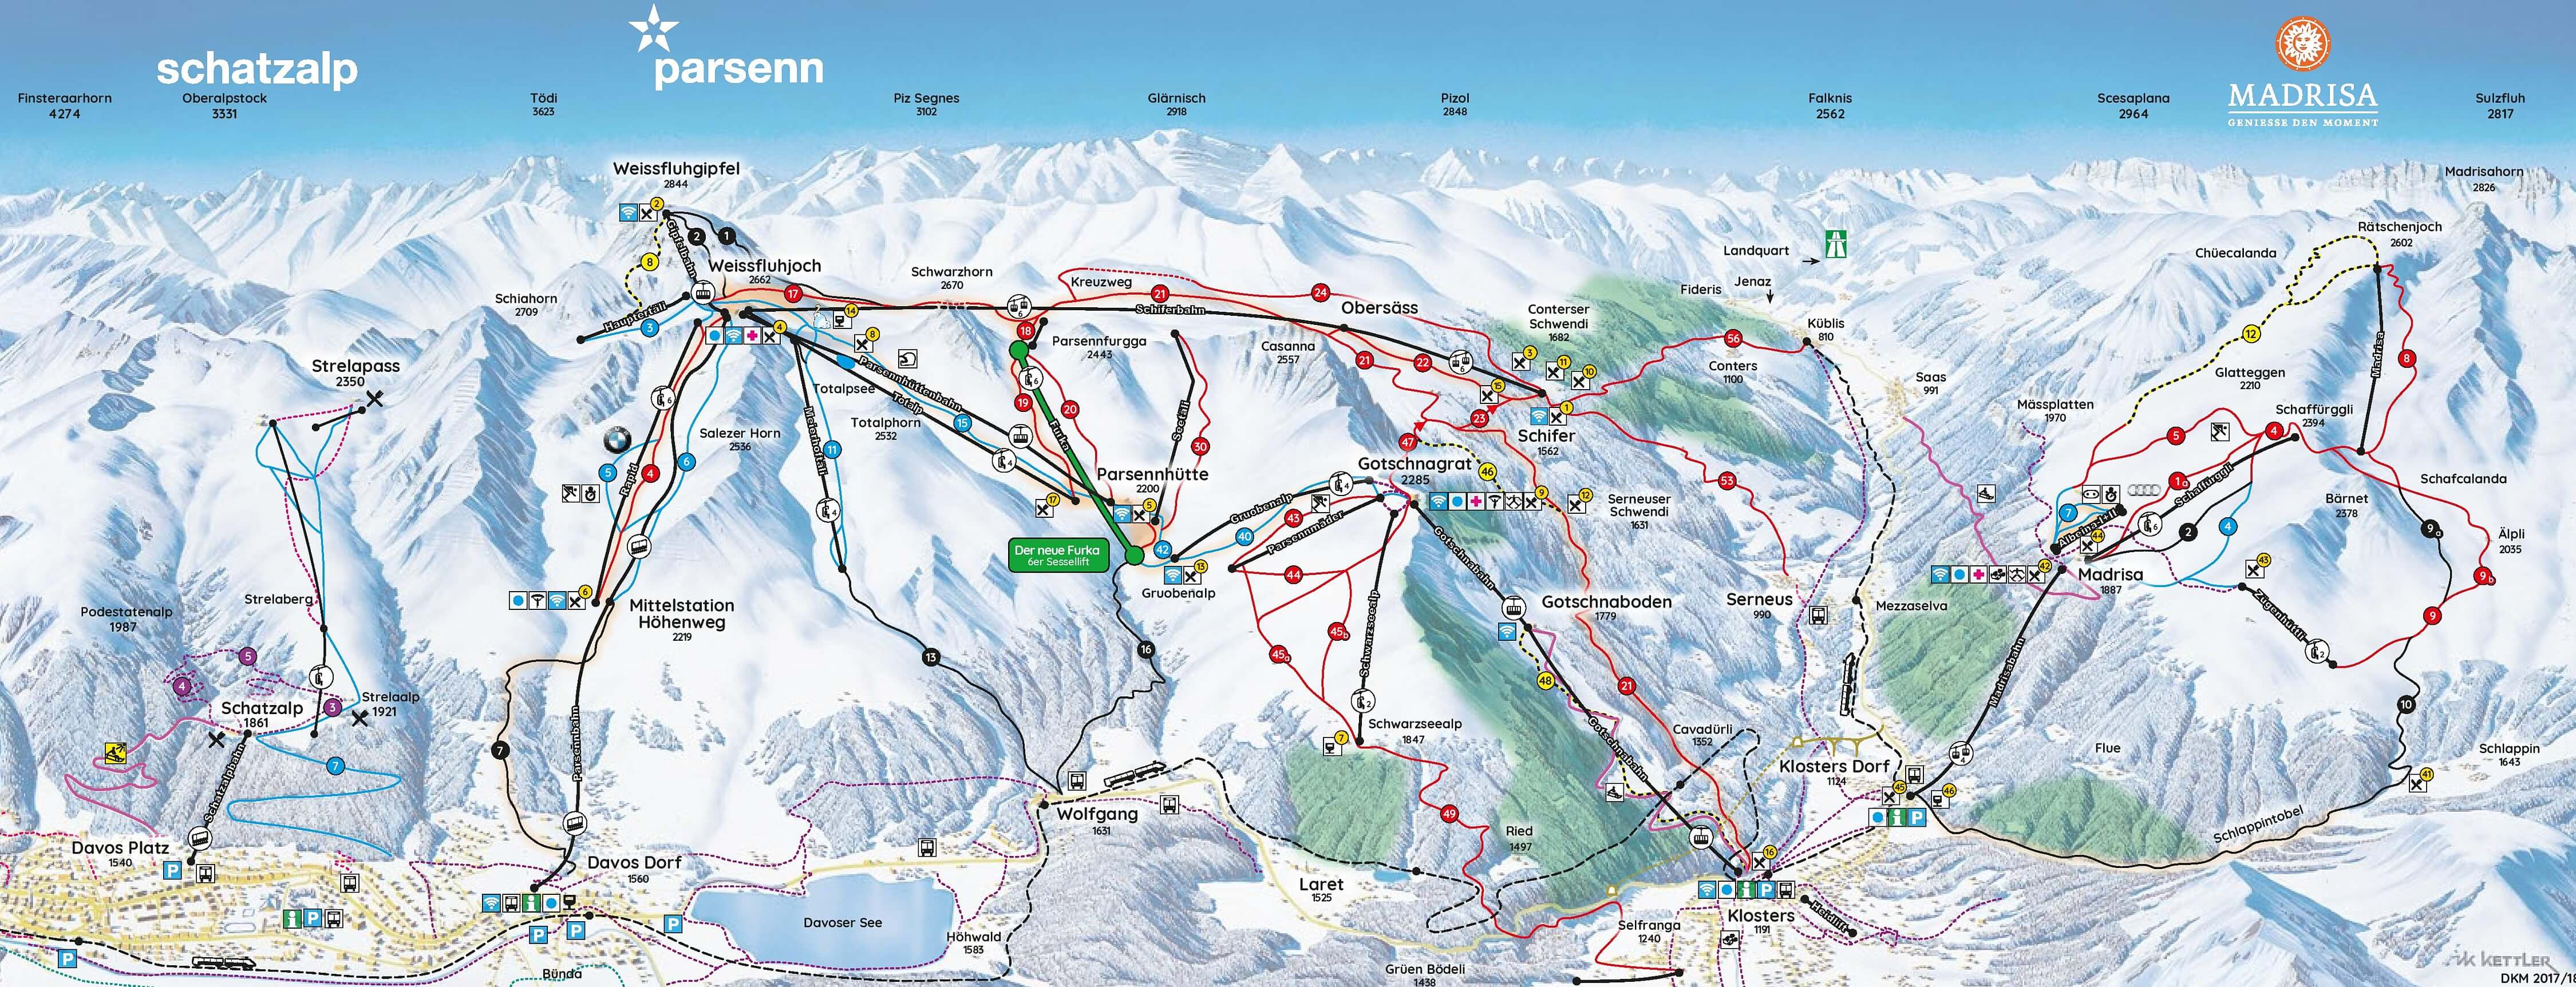 Klosters slopes